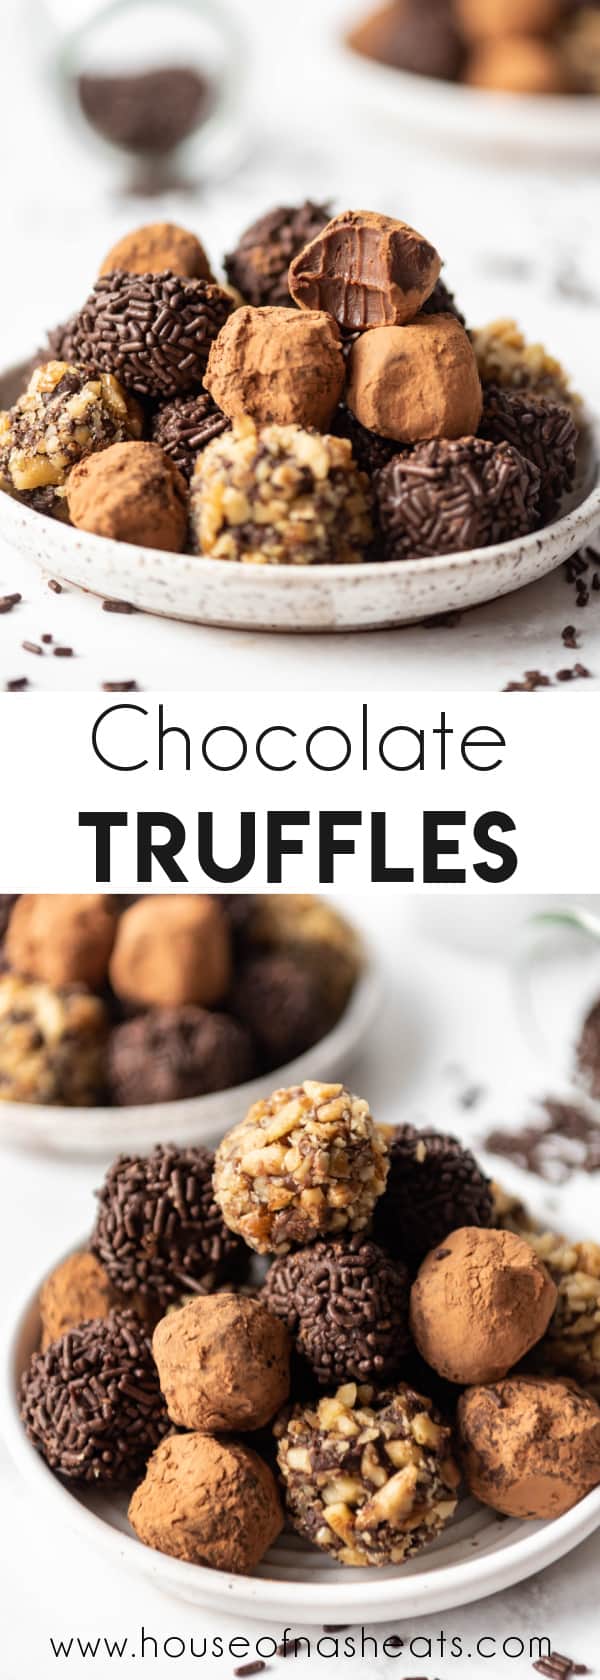 A collage of images of chocolate truffles with text overlay.